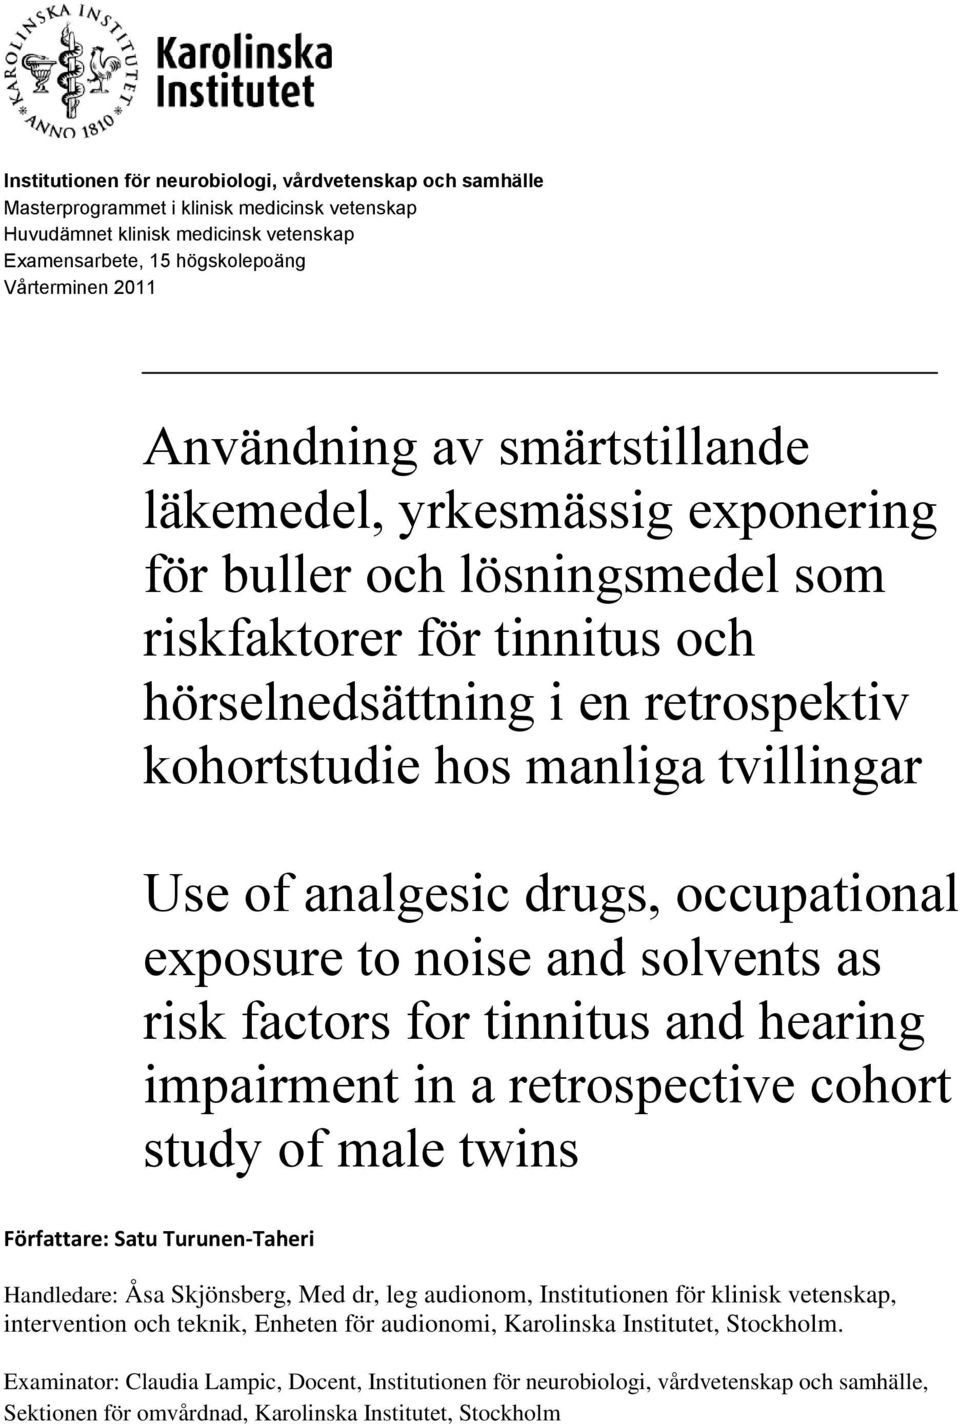 Use of analgesic drugs, occupational exposure to noise and solvents as risk factors for tinnitus and hearing impairment in a retrospective cohort study of male twins Författare: Satu Turunen-Taheri